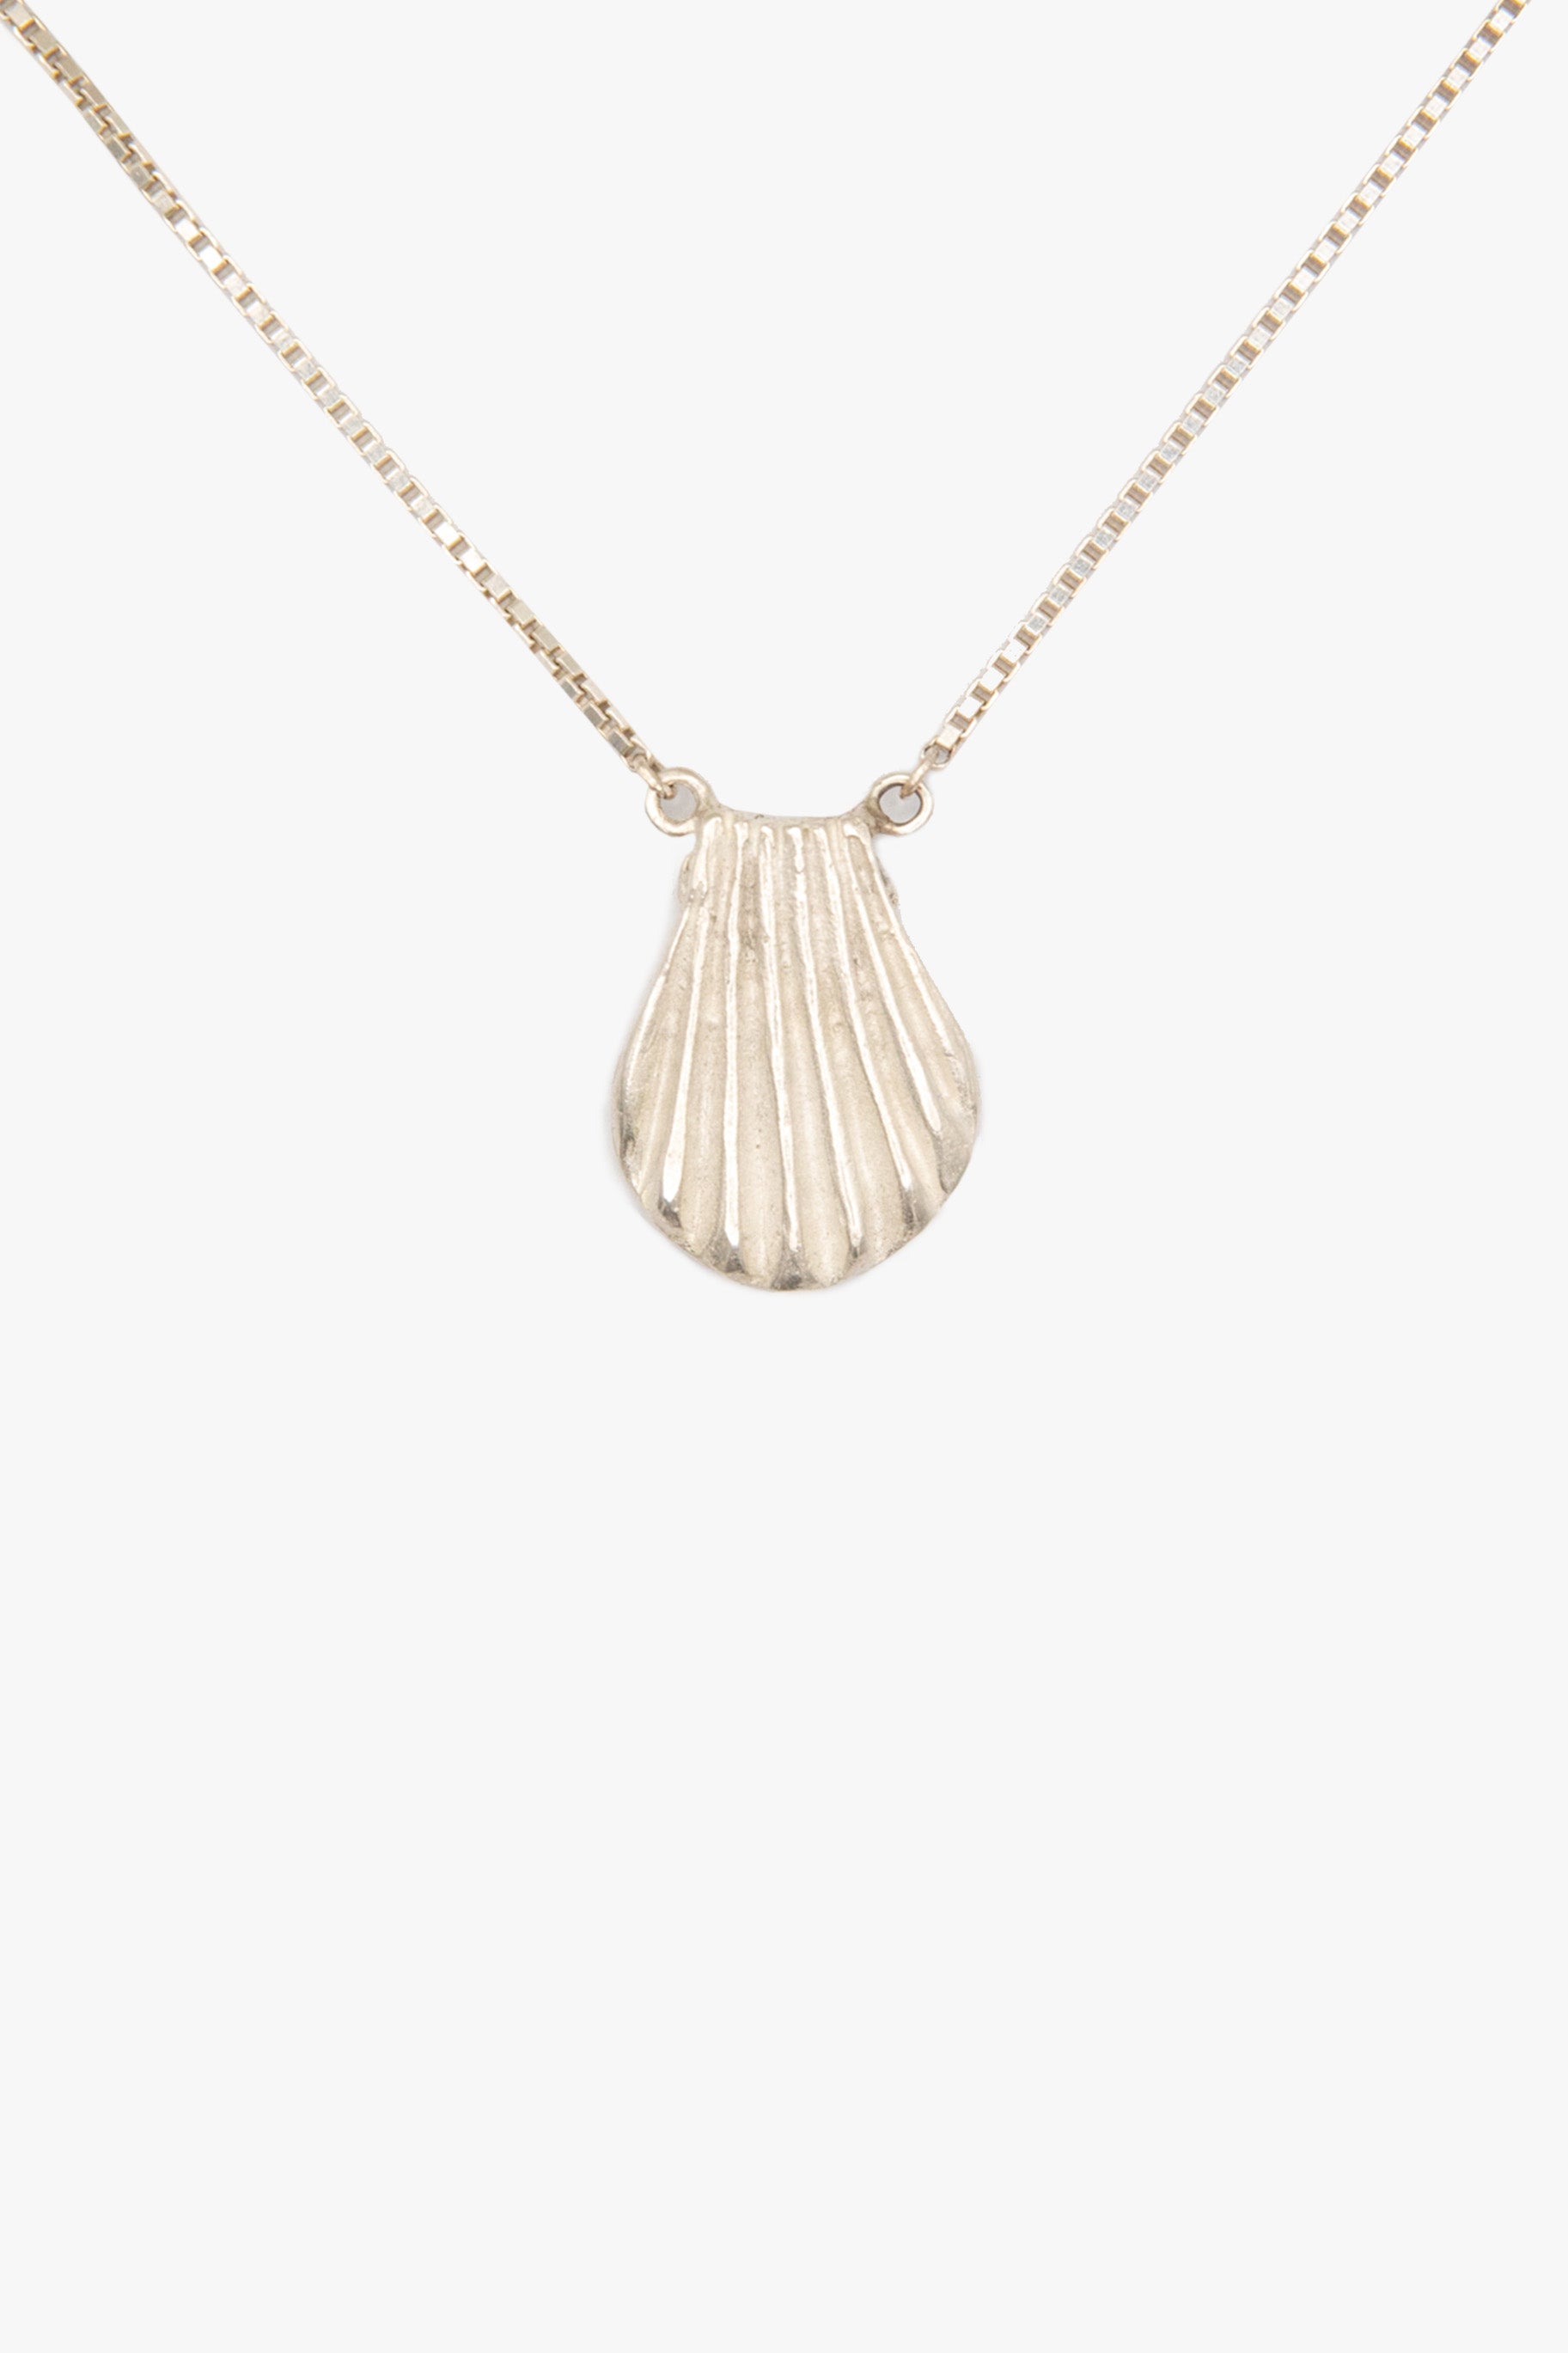 Silver shell bag necklace